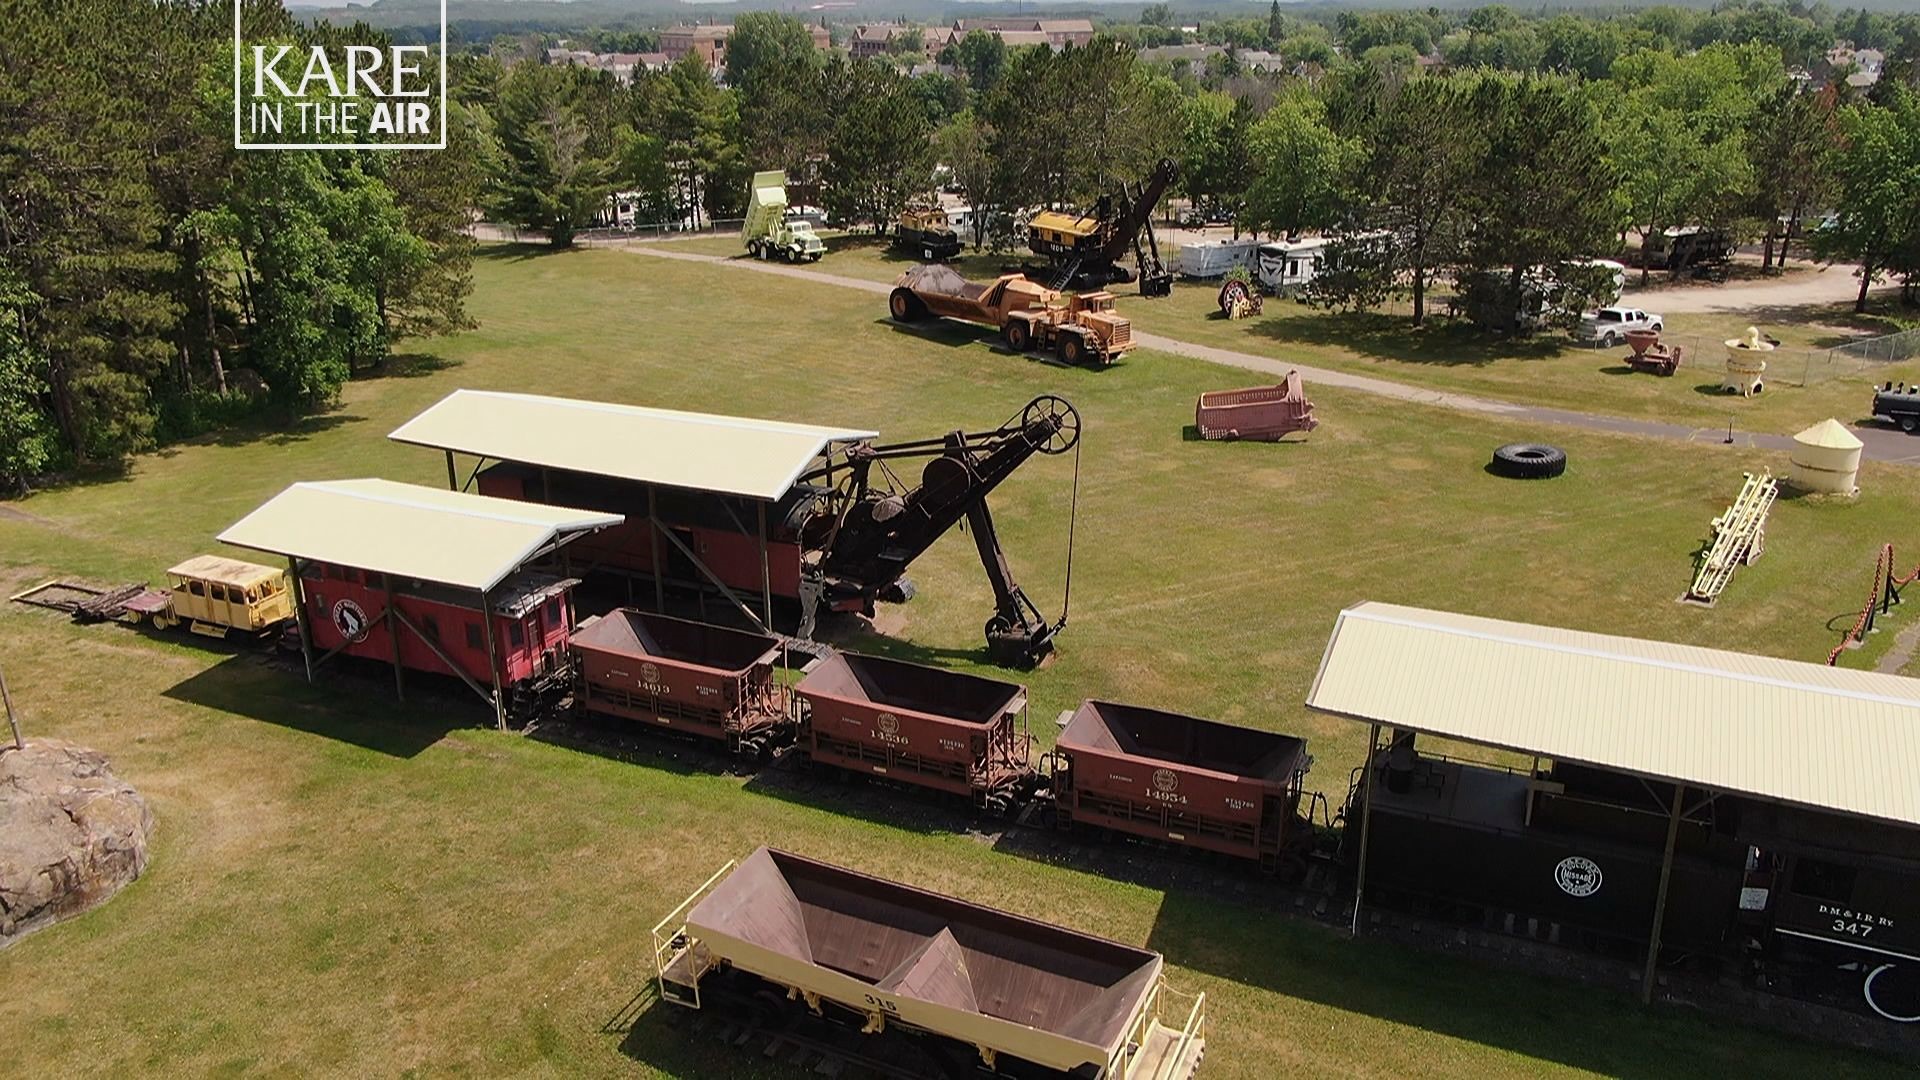 The museum tells the story of mining in northern Minnesota with giant trucks, steam shovels, drills and trains used to transport iron ore.